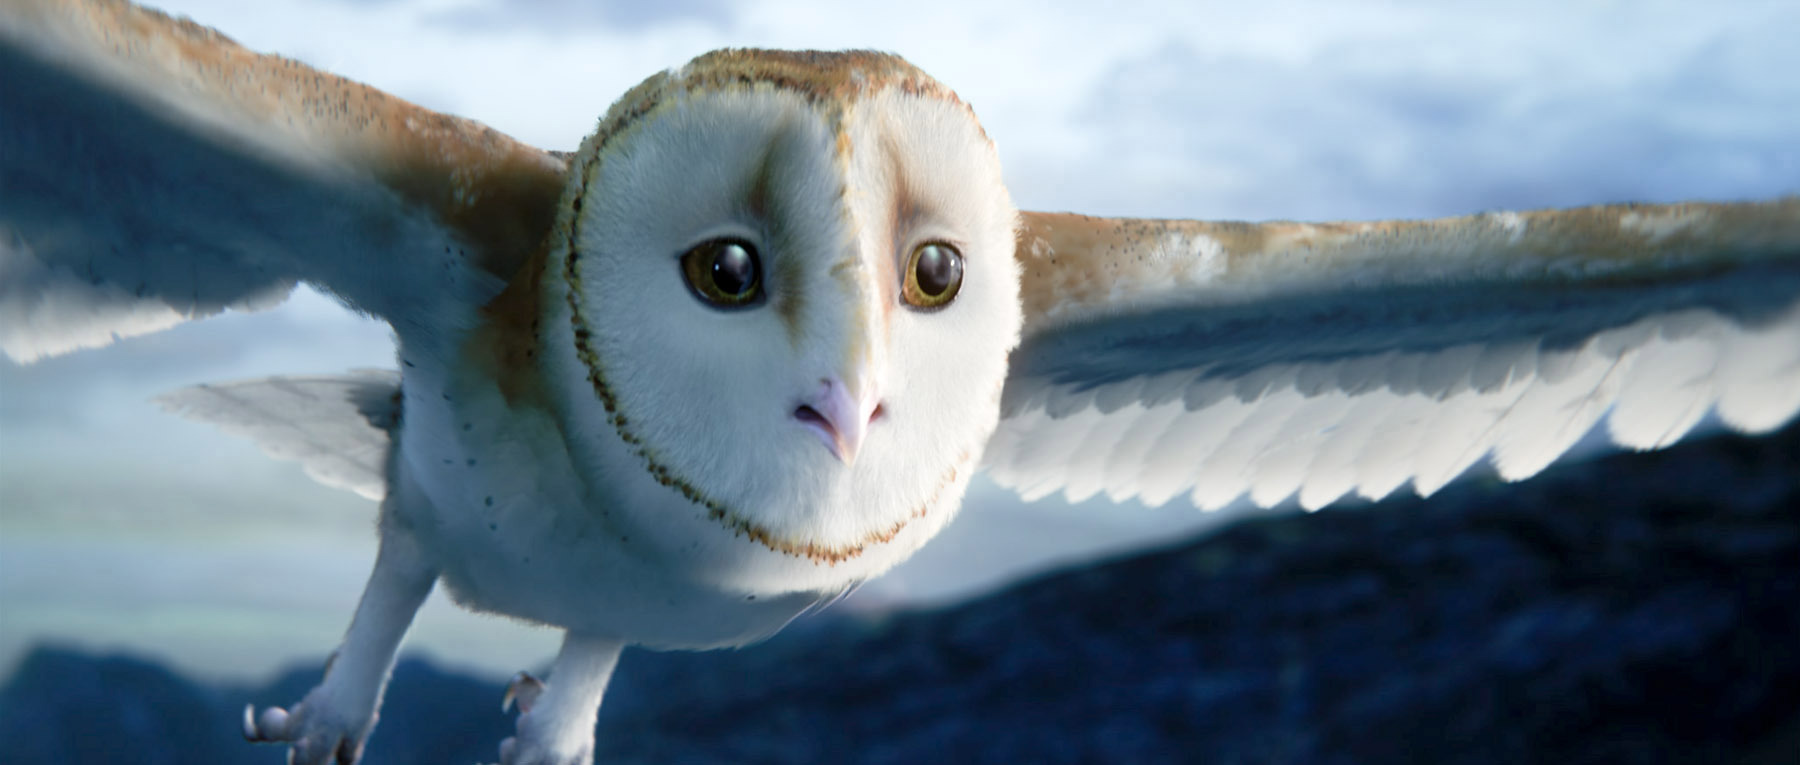 Still of Jim Sturgess in Legend of the Guardians: The Owls of Ga'Hoole (2010)